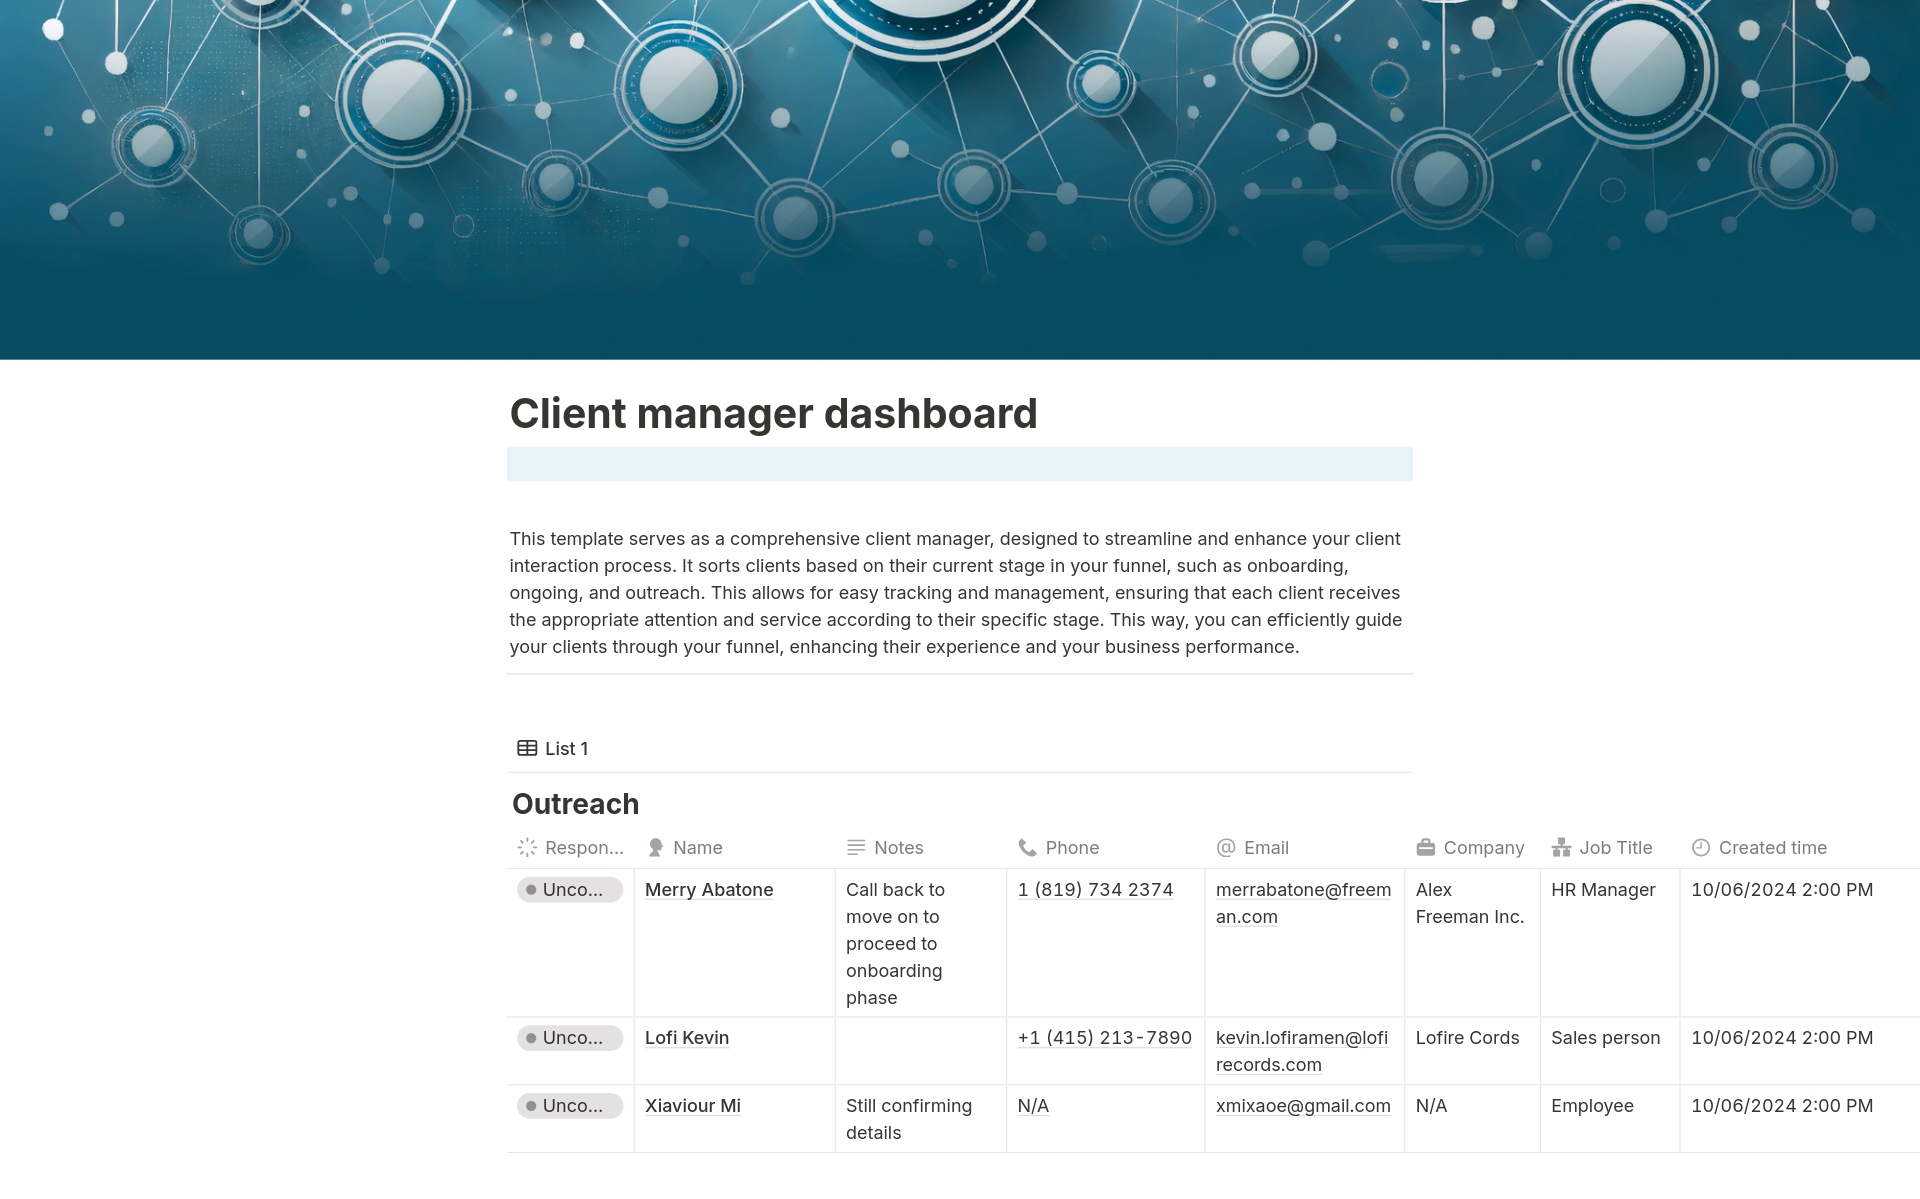 Manage client acquisition, client onboarding, and your current clients all in one tab. Whether you have to organize meetings, write client notes, or orchestrate project plans alongside your team. Do it with the help of my free client manager dashboard.